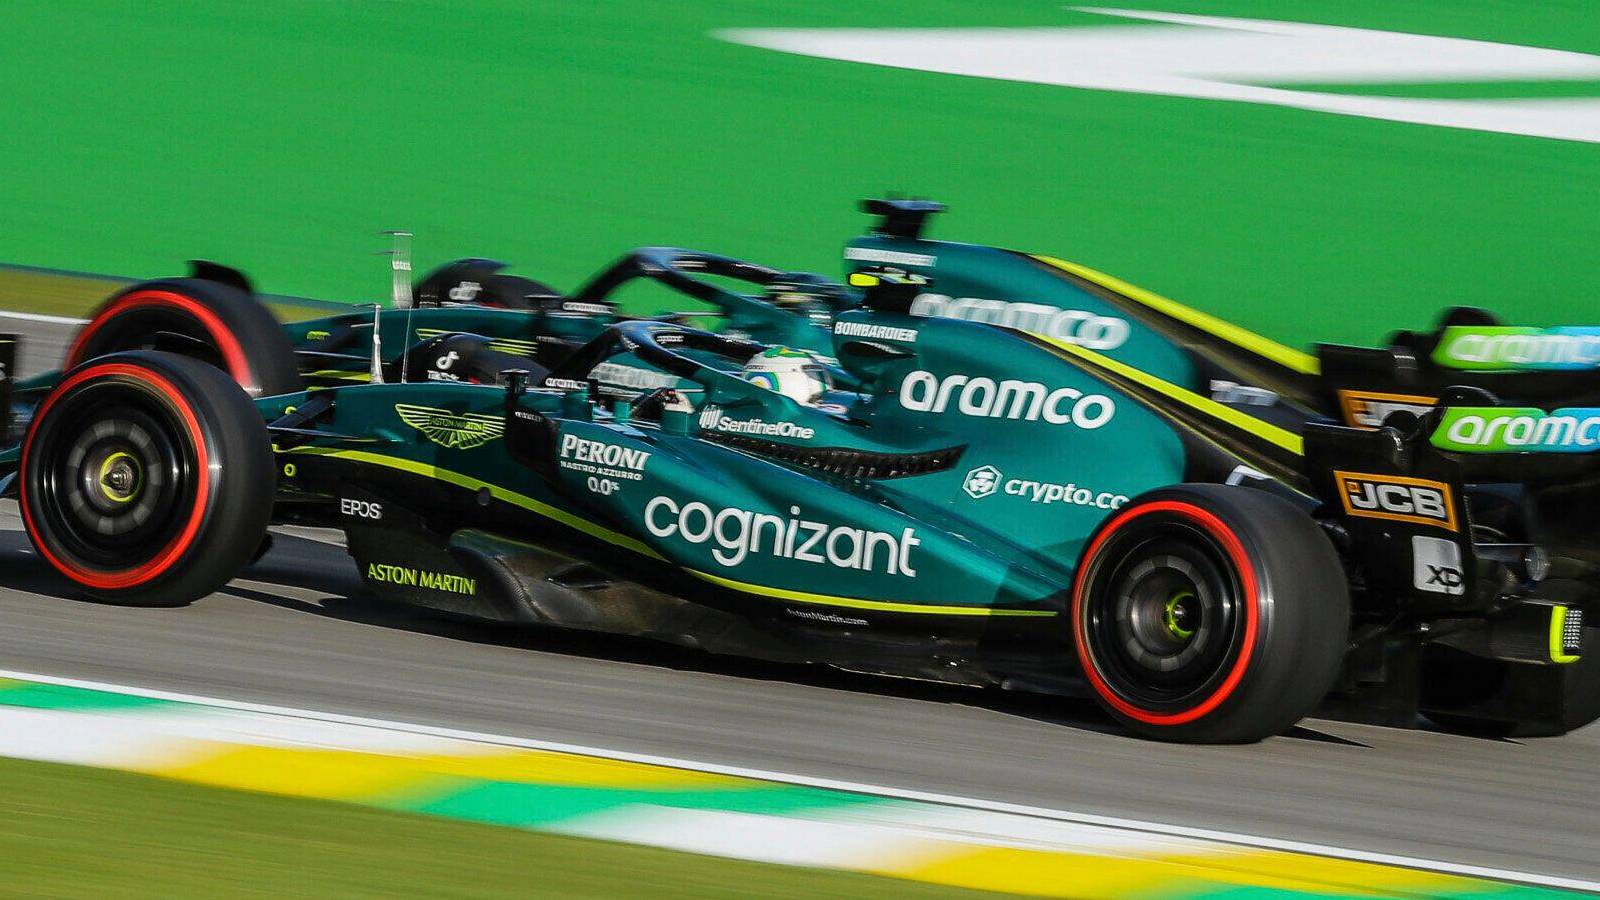 2023 Aston Martin Formula 1 car 'very different' to the AMR22